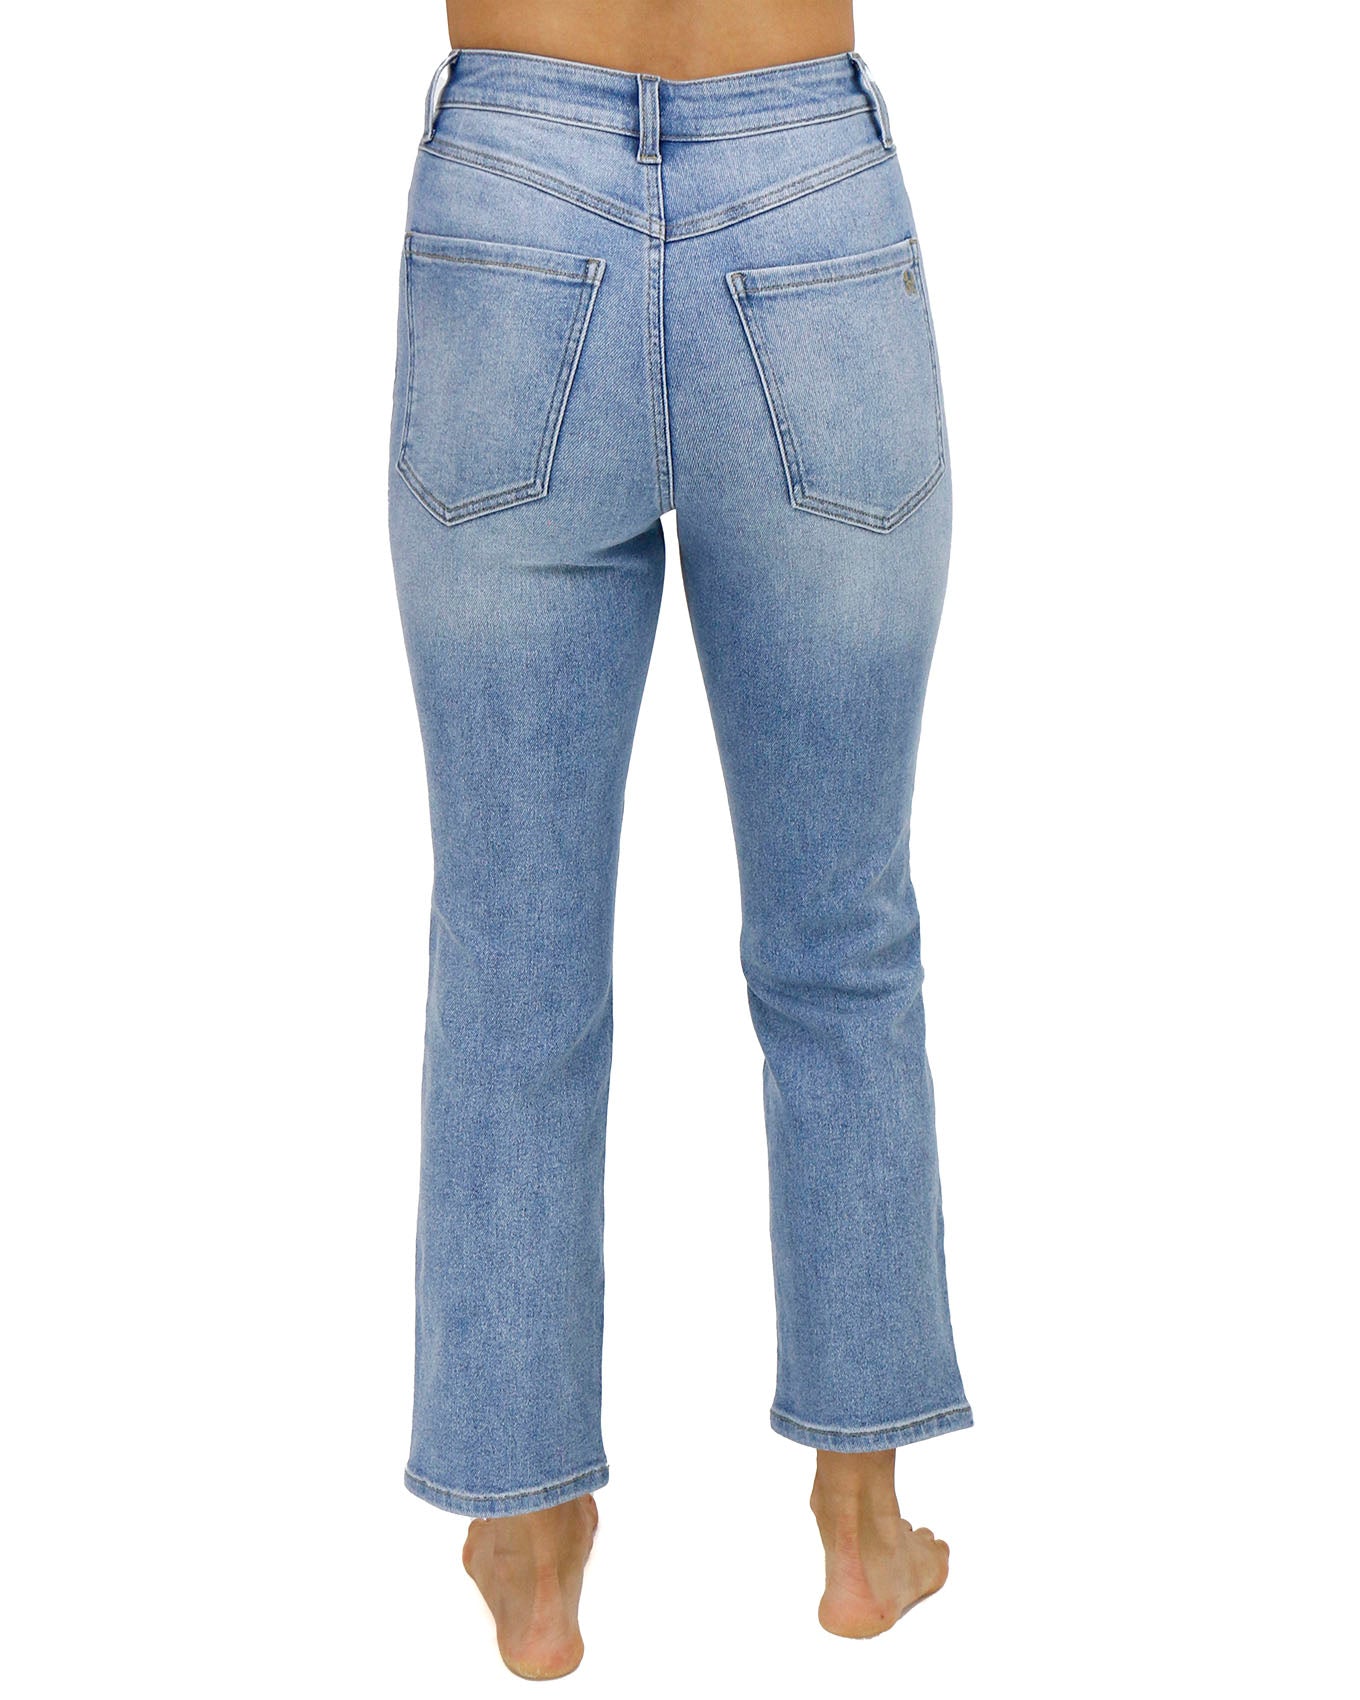 Premium Denim High Waisted Mom Jeans in Non Distressed Mid-Wash